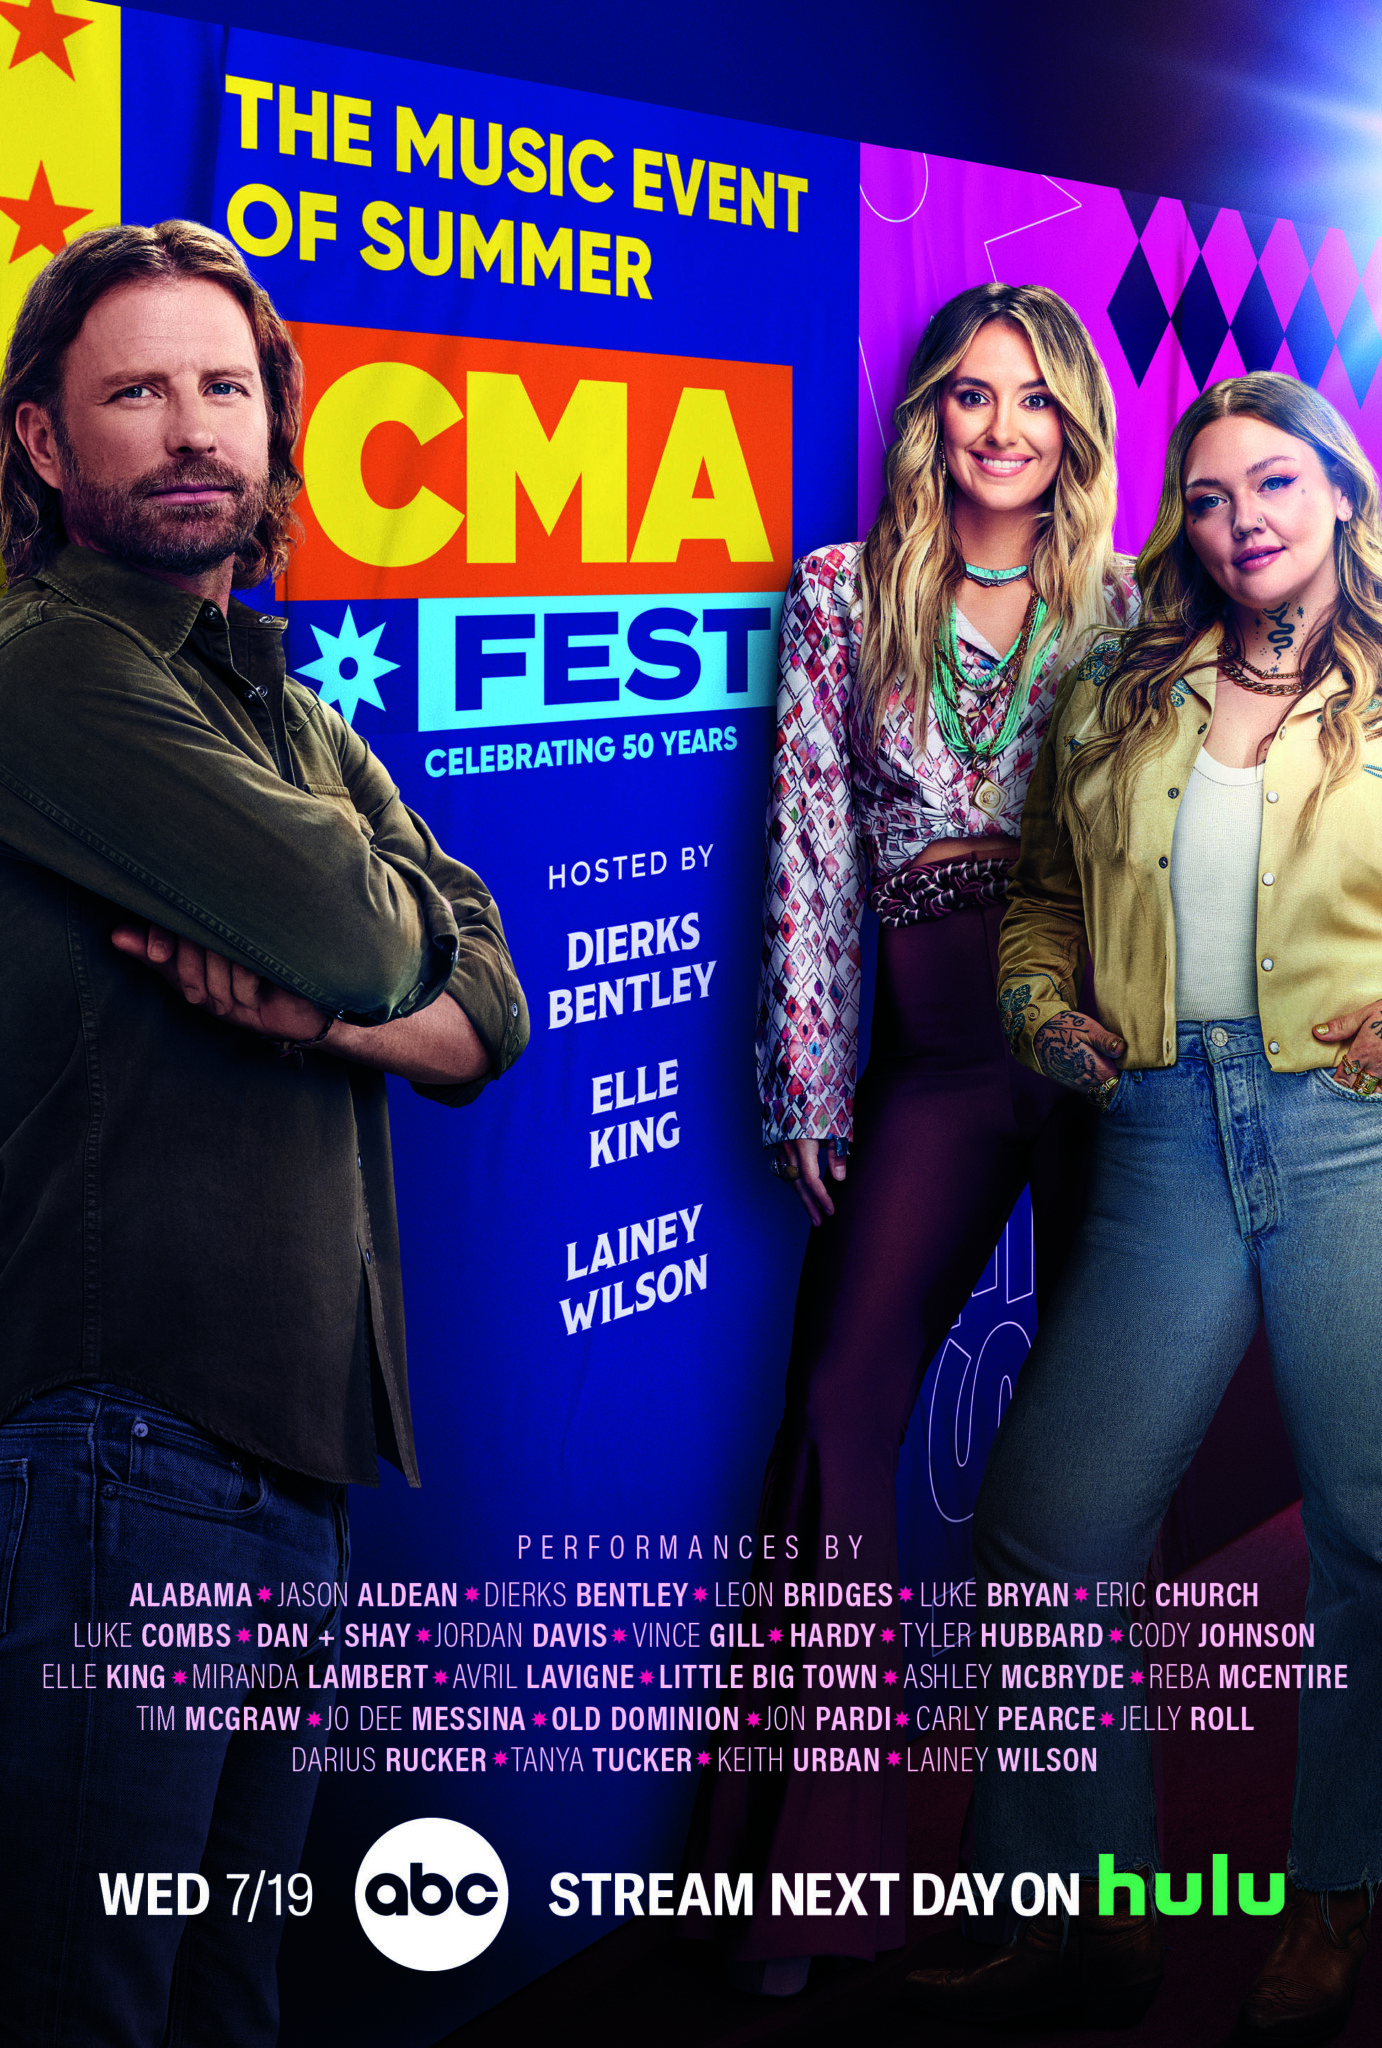 ABC's "CMA Fest Celebrating 50 Years" to feature special performances